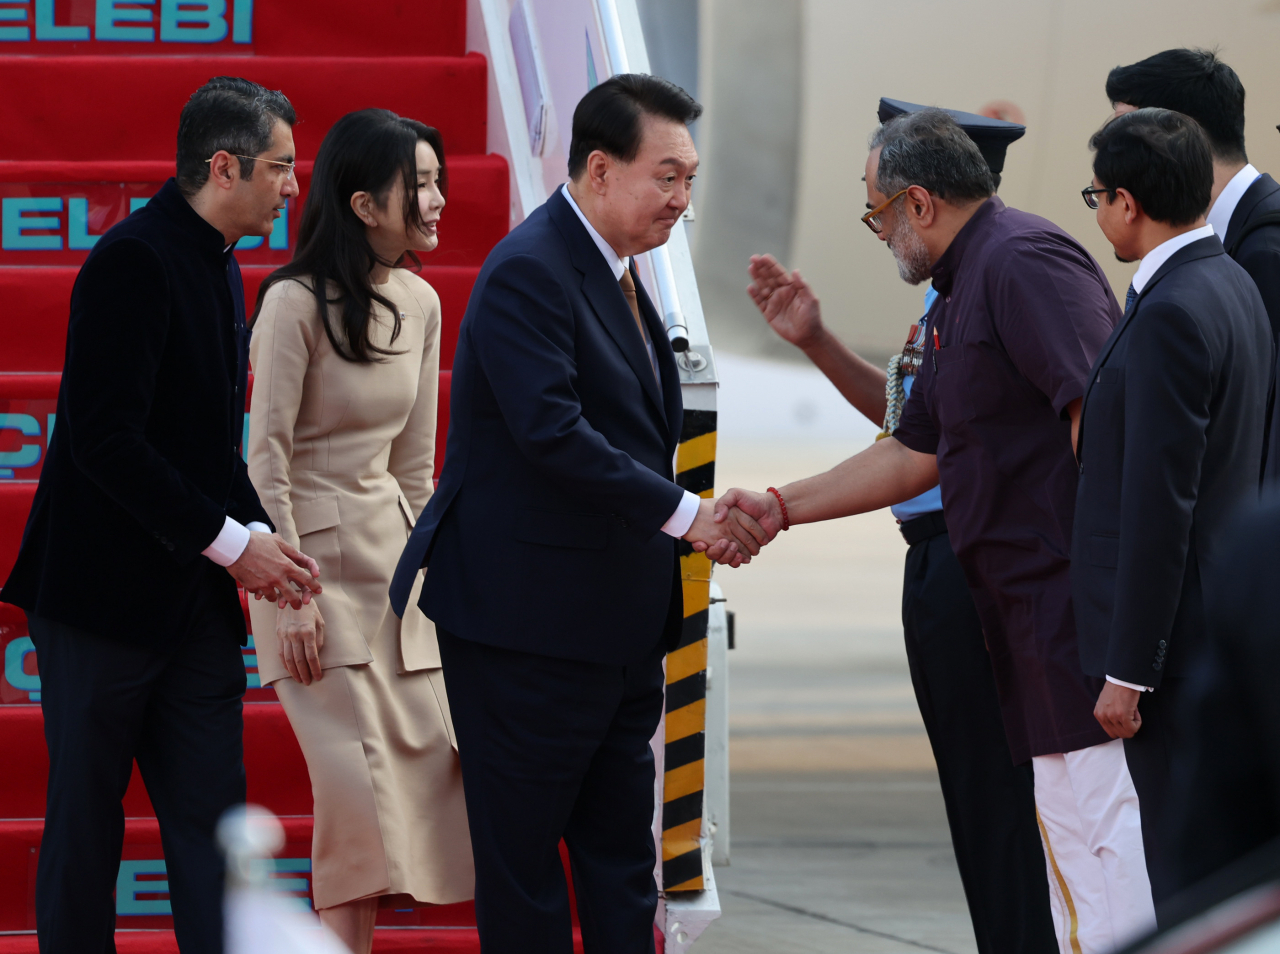 President Yoon Suk Yeol (center) arrives in New Delhi to attend a G20 summit on Friday. (Yonhap)